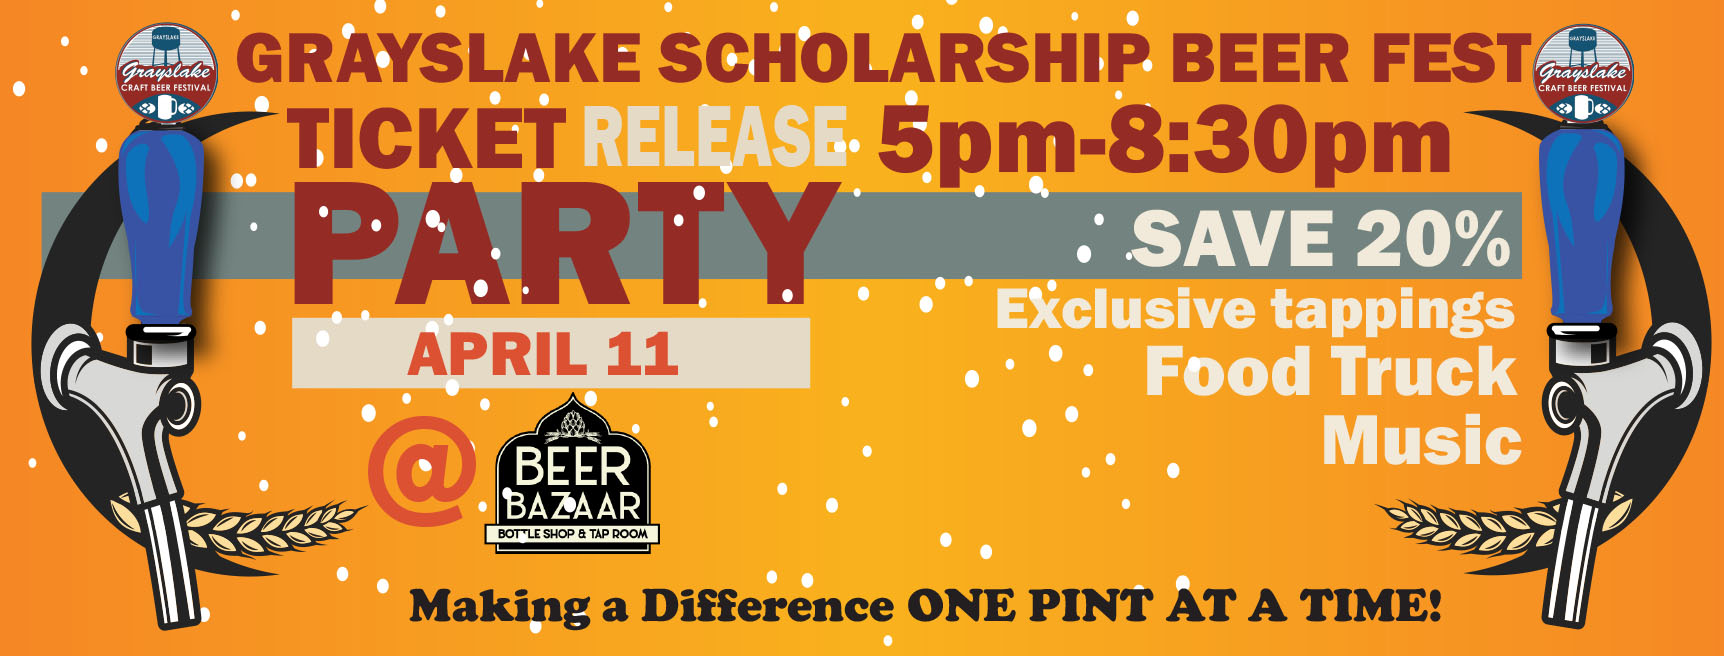 Grayslake Scholarship Beer Fest Ticket Release Party!